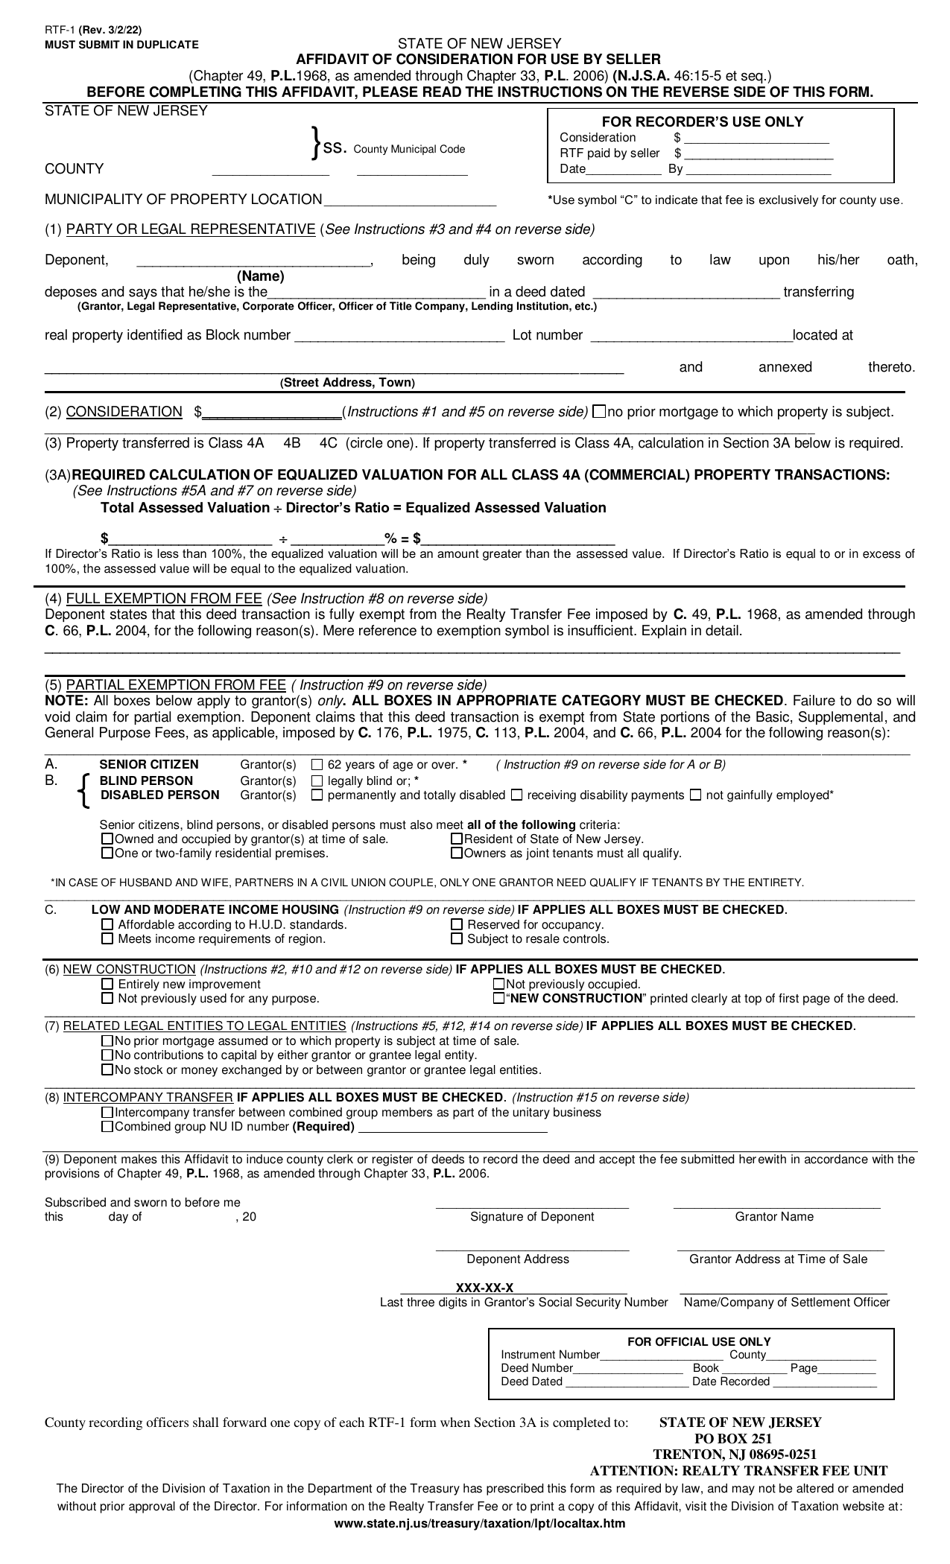 Form RTF-1 Affidavit of Consideration for Use by Seller - New Jersey, Page 1